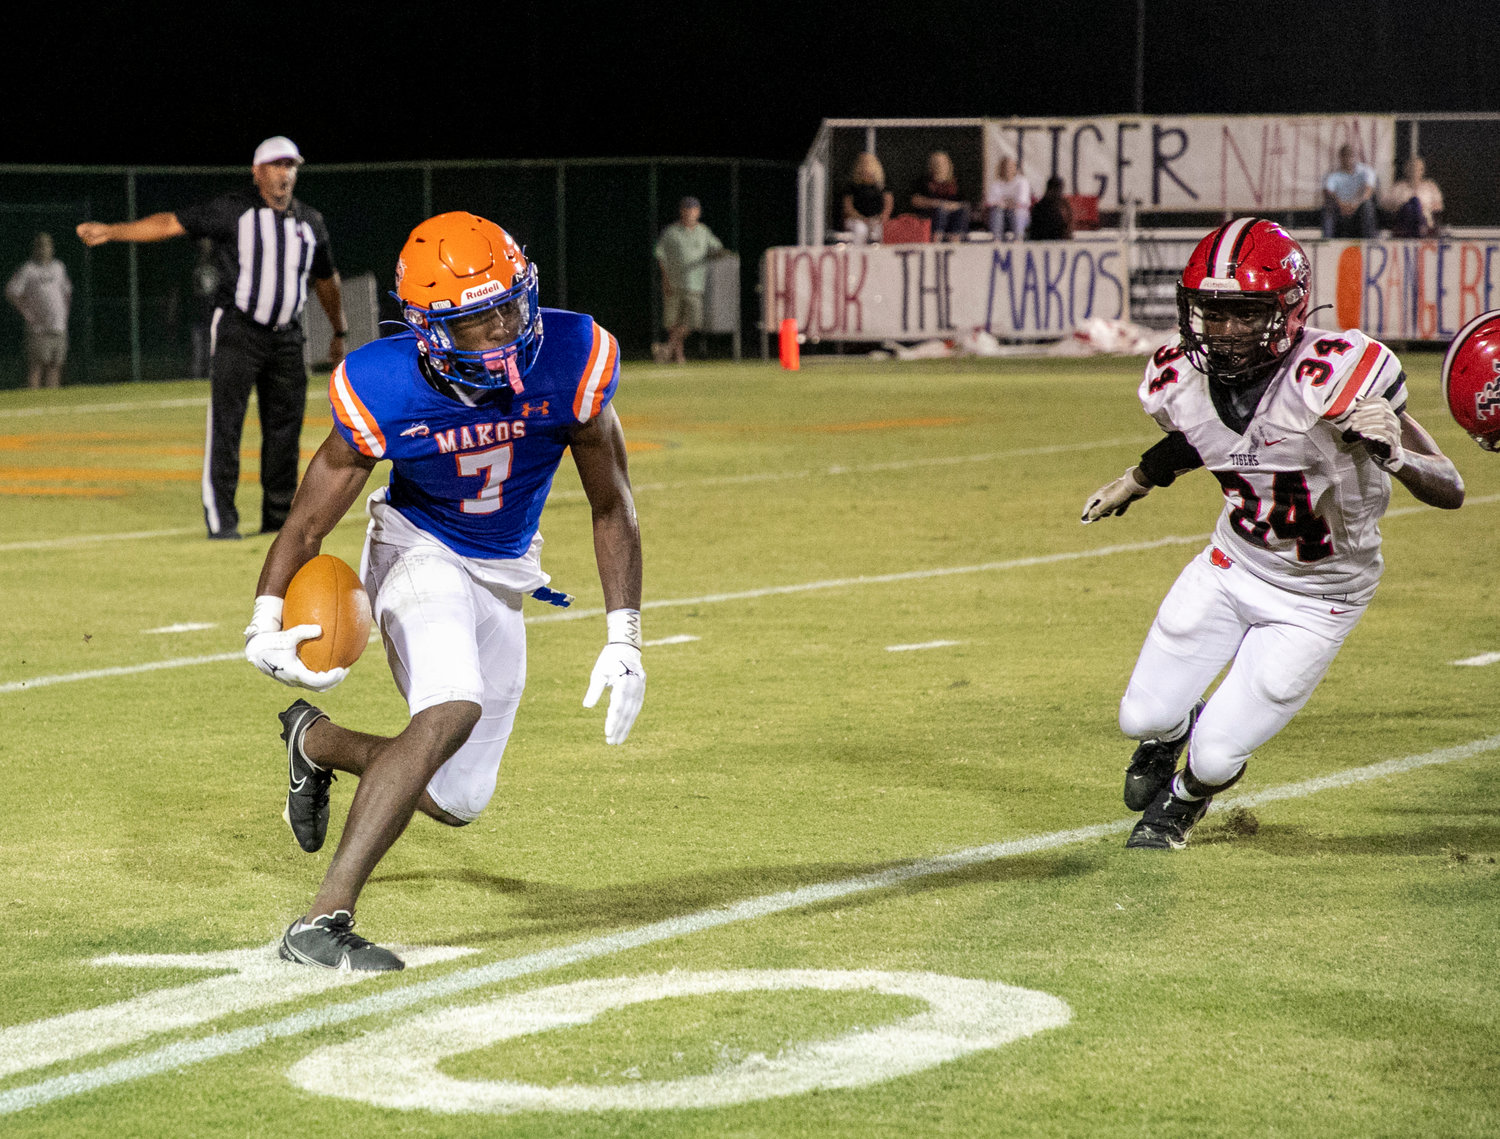 Orange Beach junior Chris Pearson sets up a block on a kickoff return in Class 4A Region 1 action between the Makos and T.R. Miller Tigers Sept. 16 at the Orange Beach Sportsplex. Pearson scored in all three phases last Friday in the Makos’ second home playoff game.